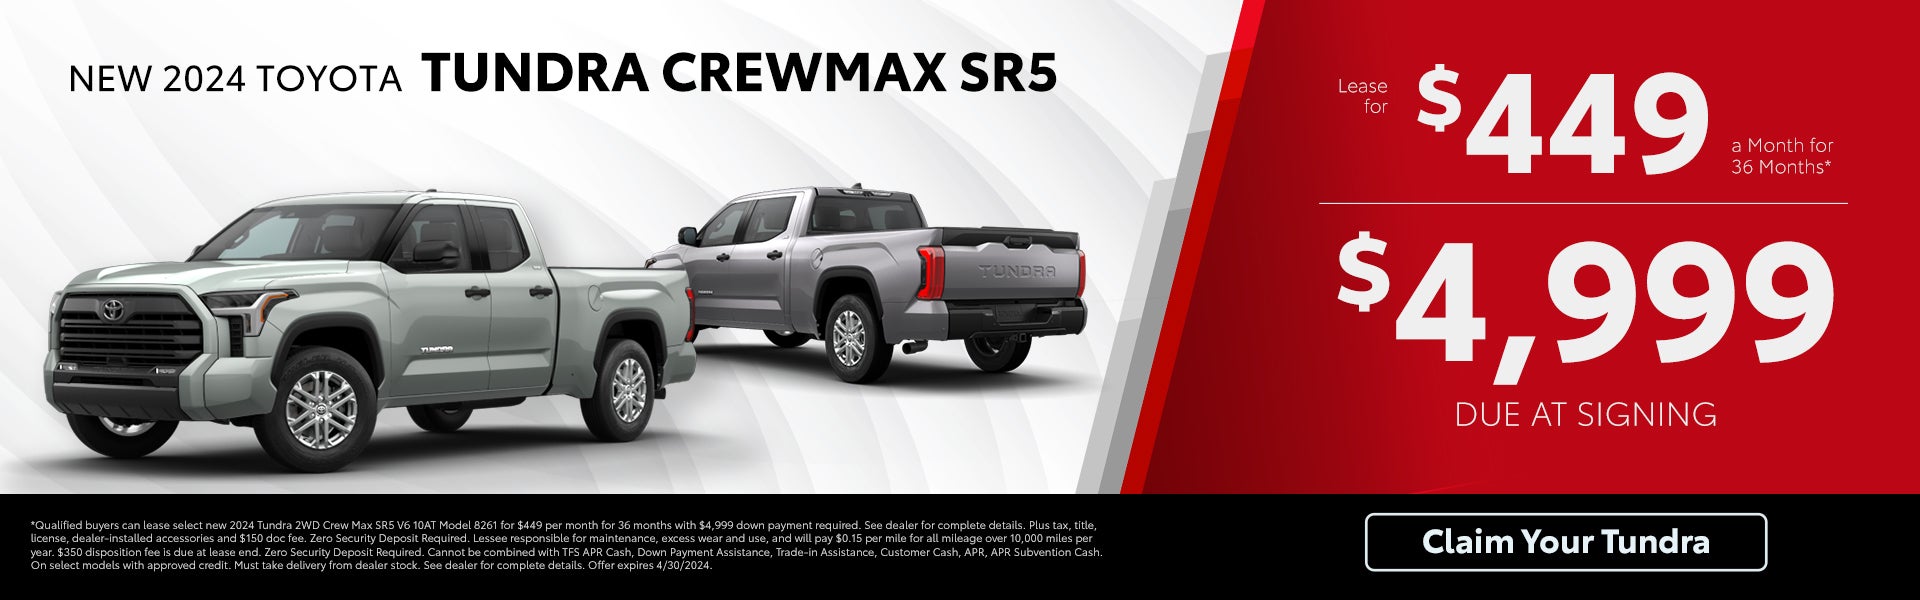 New 2024 Toyota Tundra CrewMax Lease Offer Fort Worth TX 